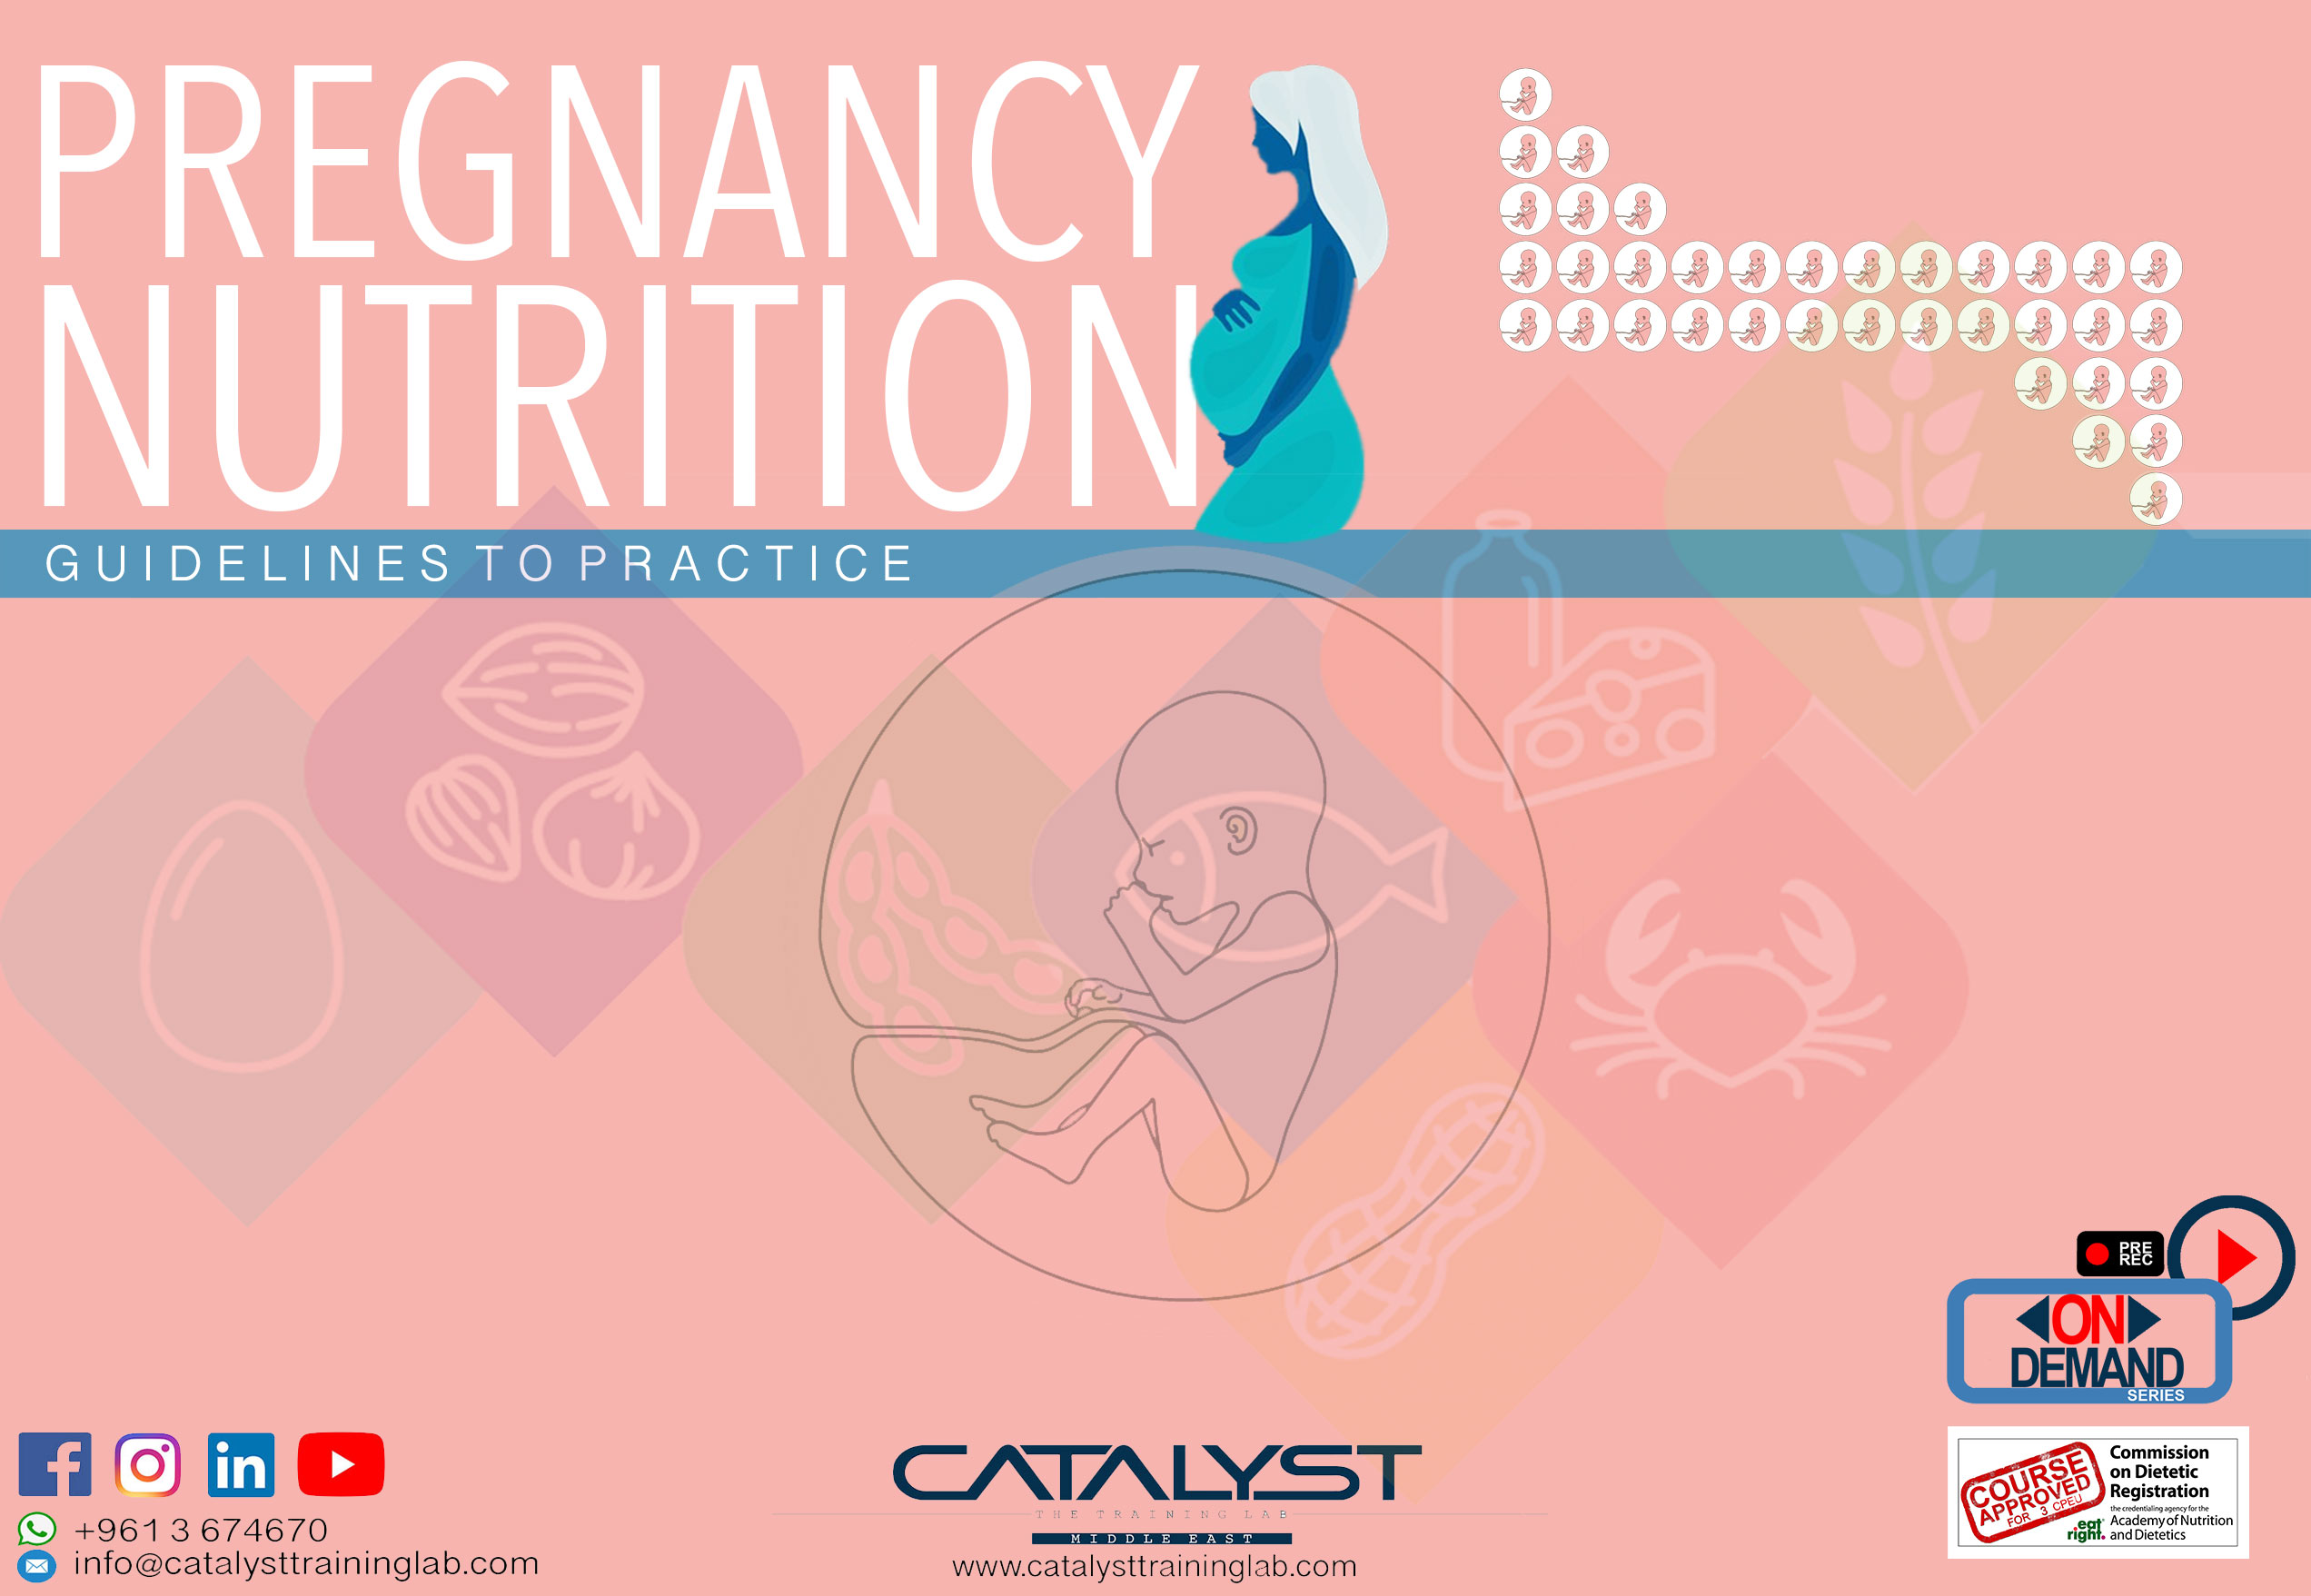 Pregnancy Nutrition - Guidelines to Practice